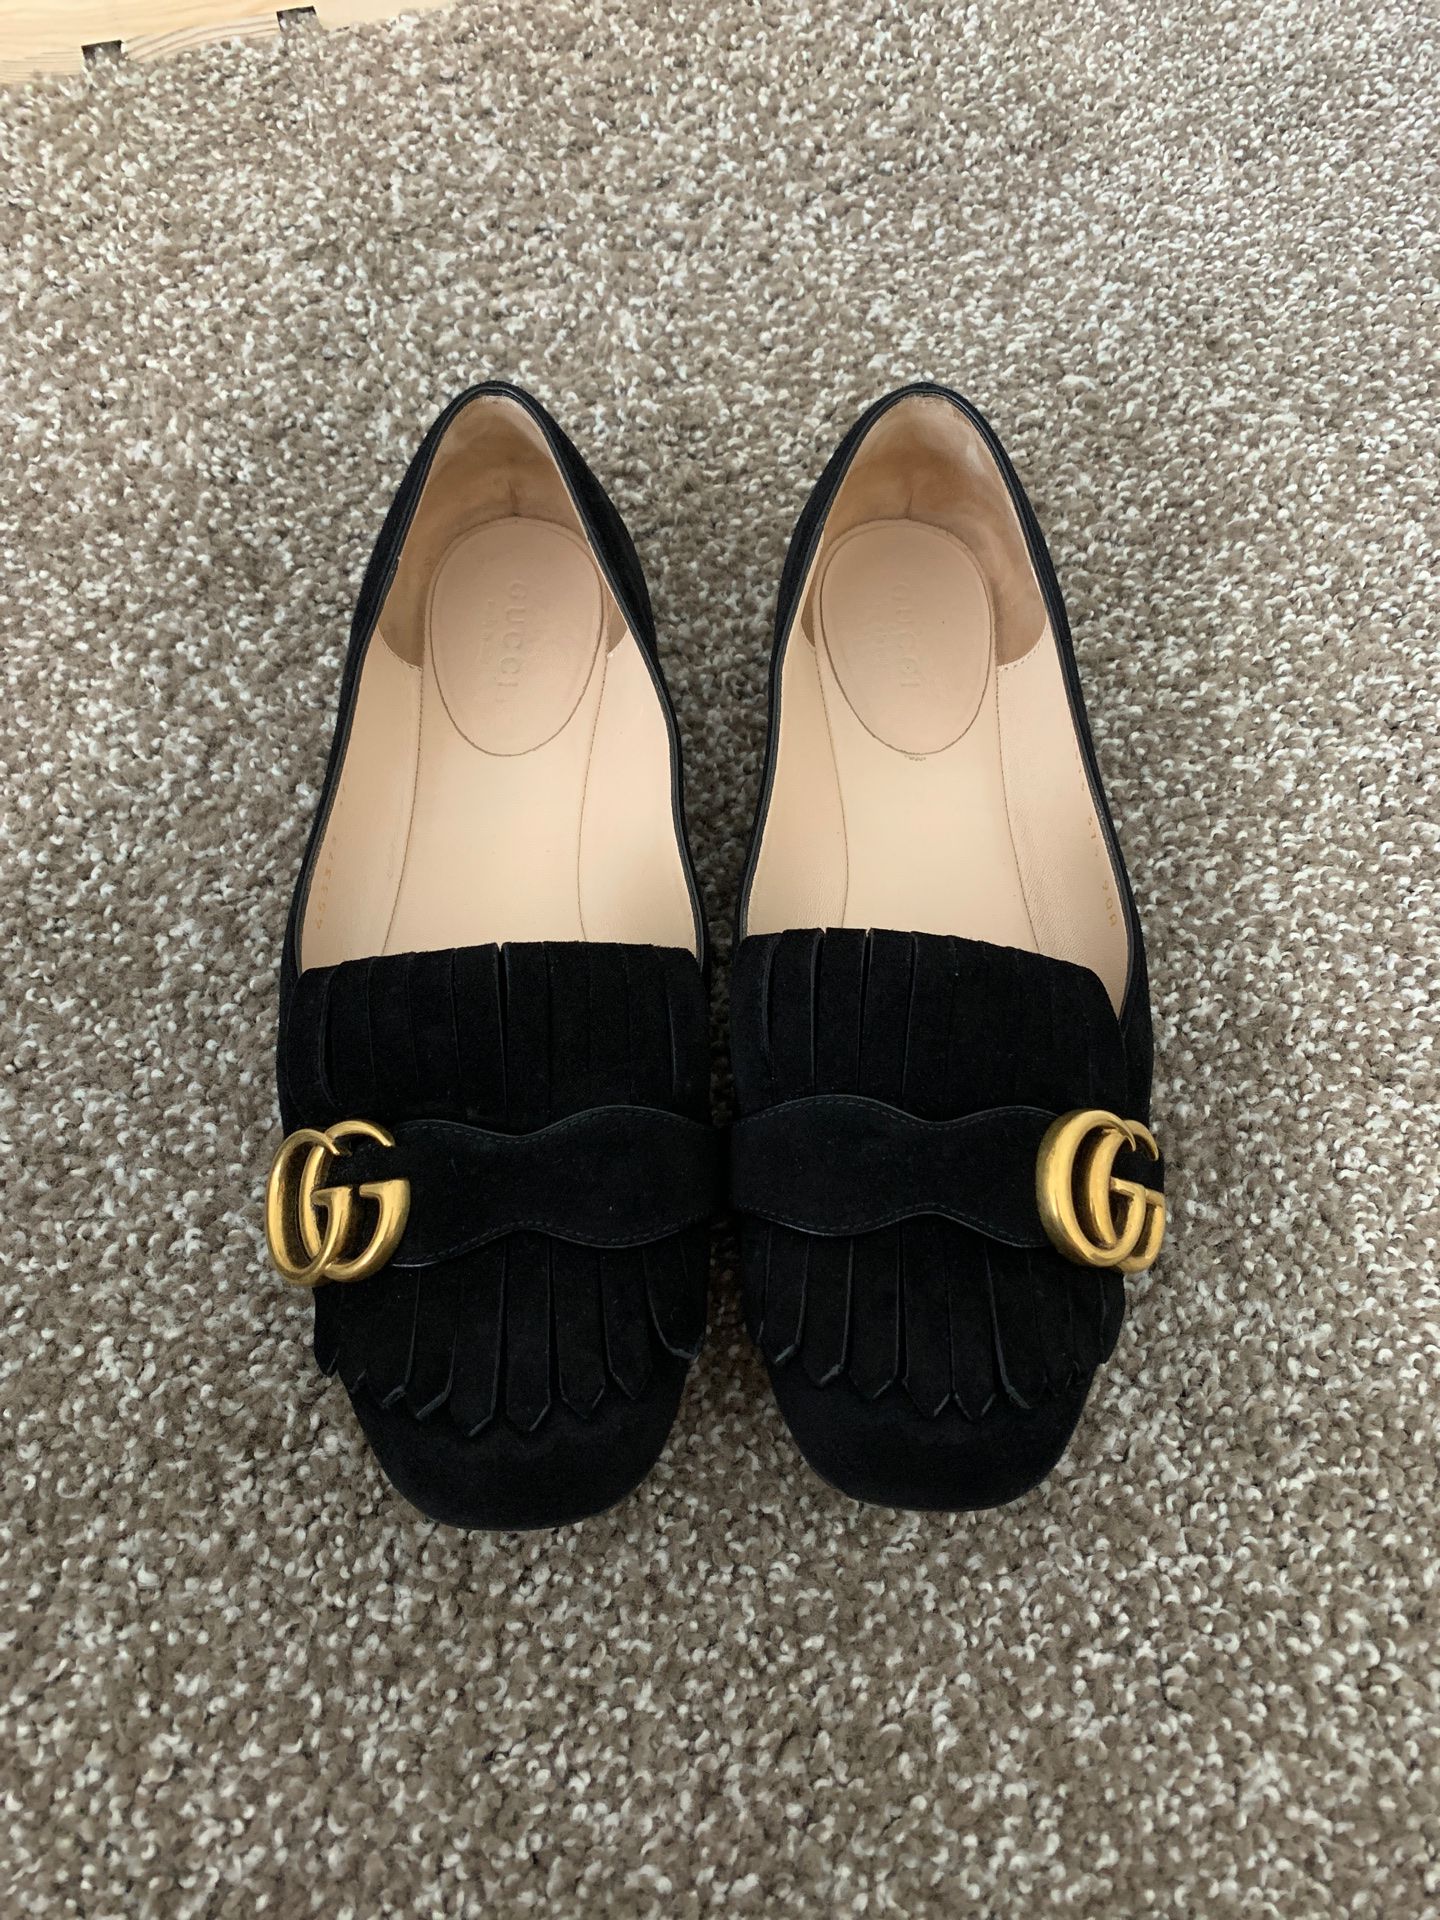 Gucci GG Marmont Suede Fringe Loafer size 7 1/2